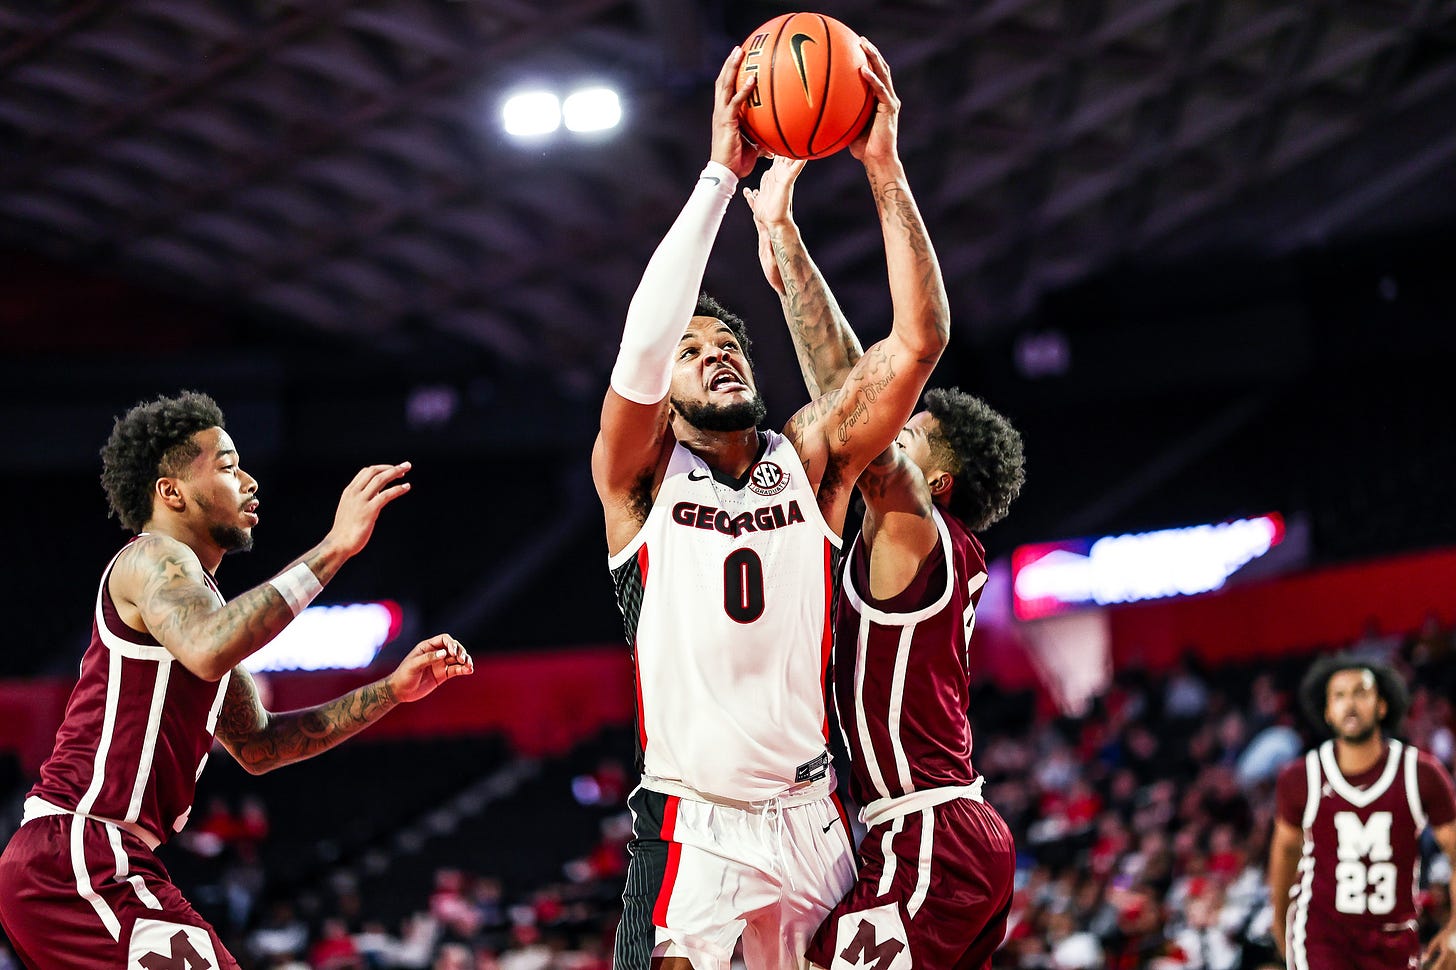 Georgia basketball player Jailyn Ingram (0) during an exhibition against Morehouse at Stegeman Coliseum in Athens, Ga., on Friday, Nov. 3, 2021. (Photo by Tony Walsh)